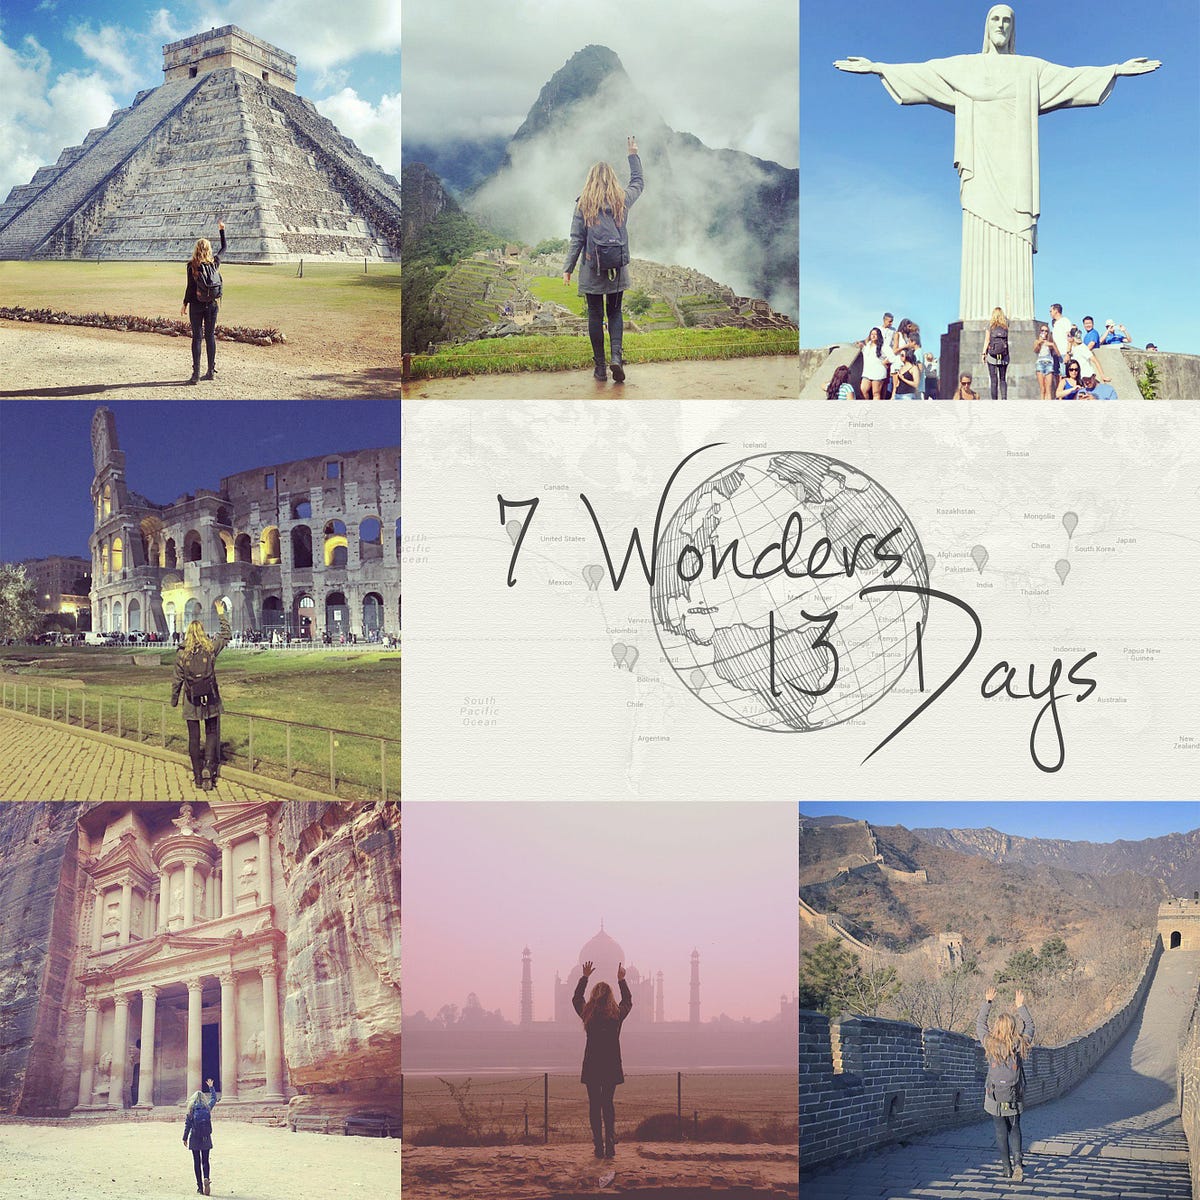 The Seven Wonders of The World